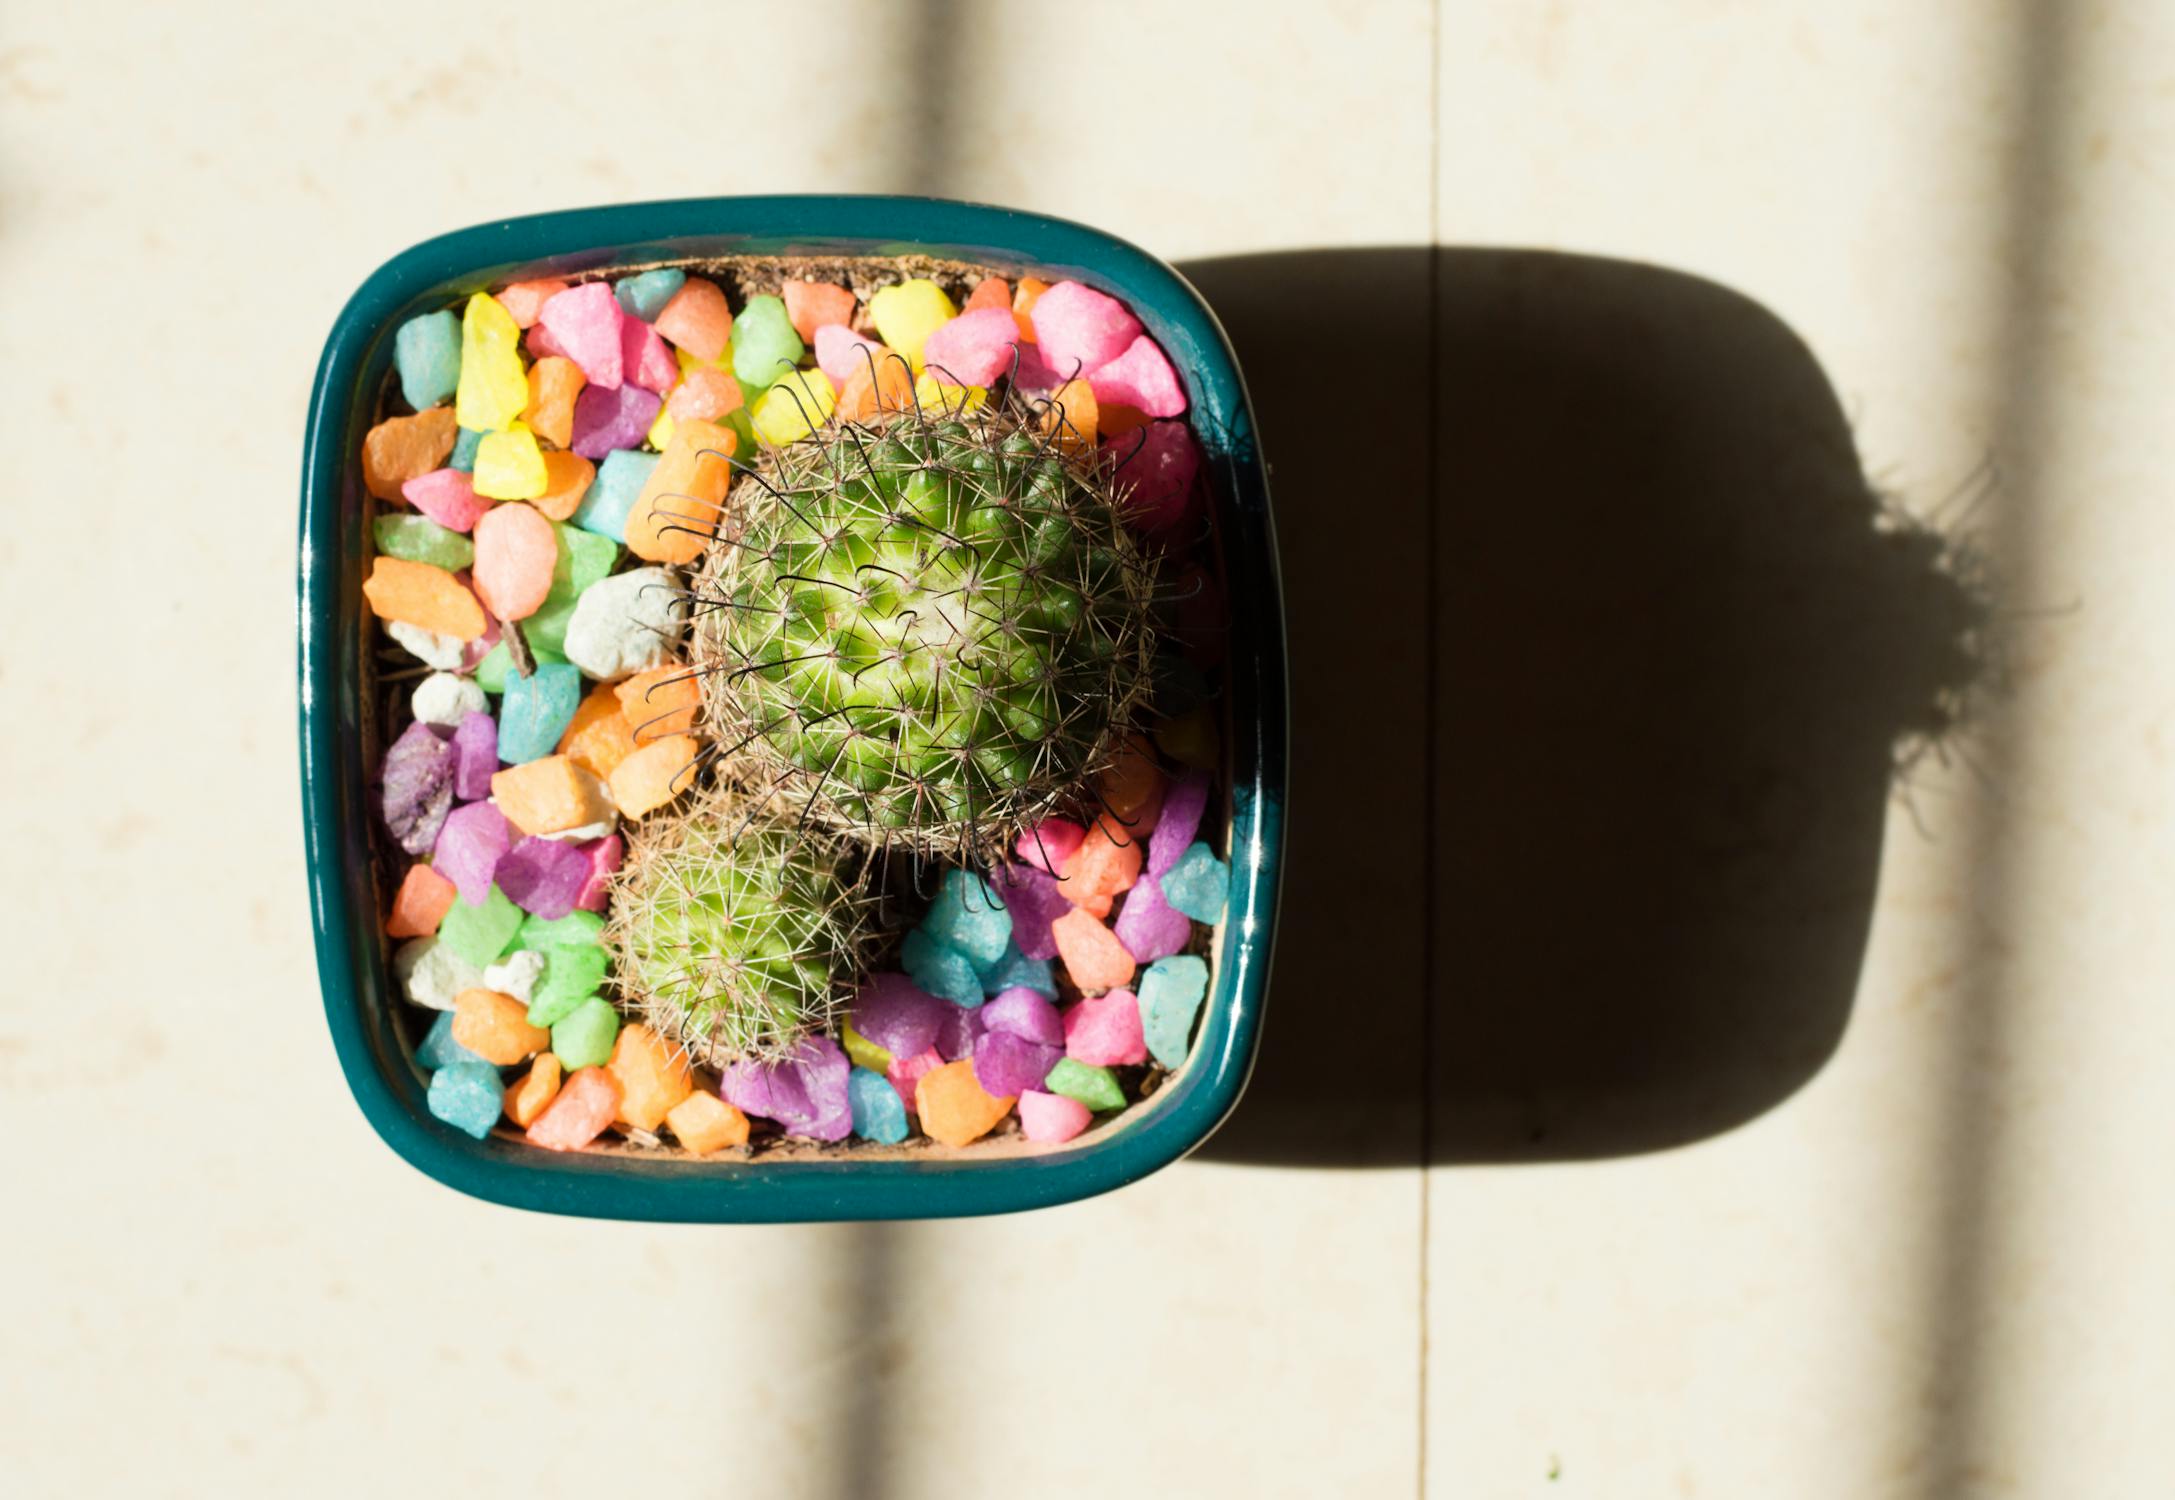 Cactus in pot with colorful stones